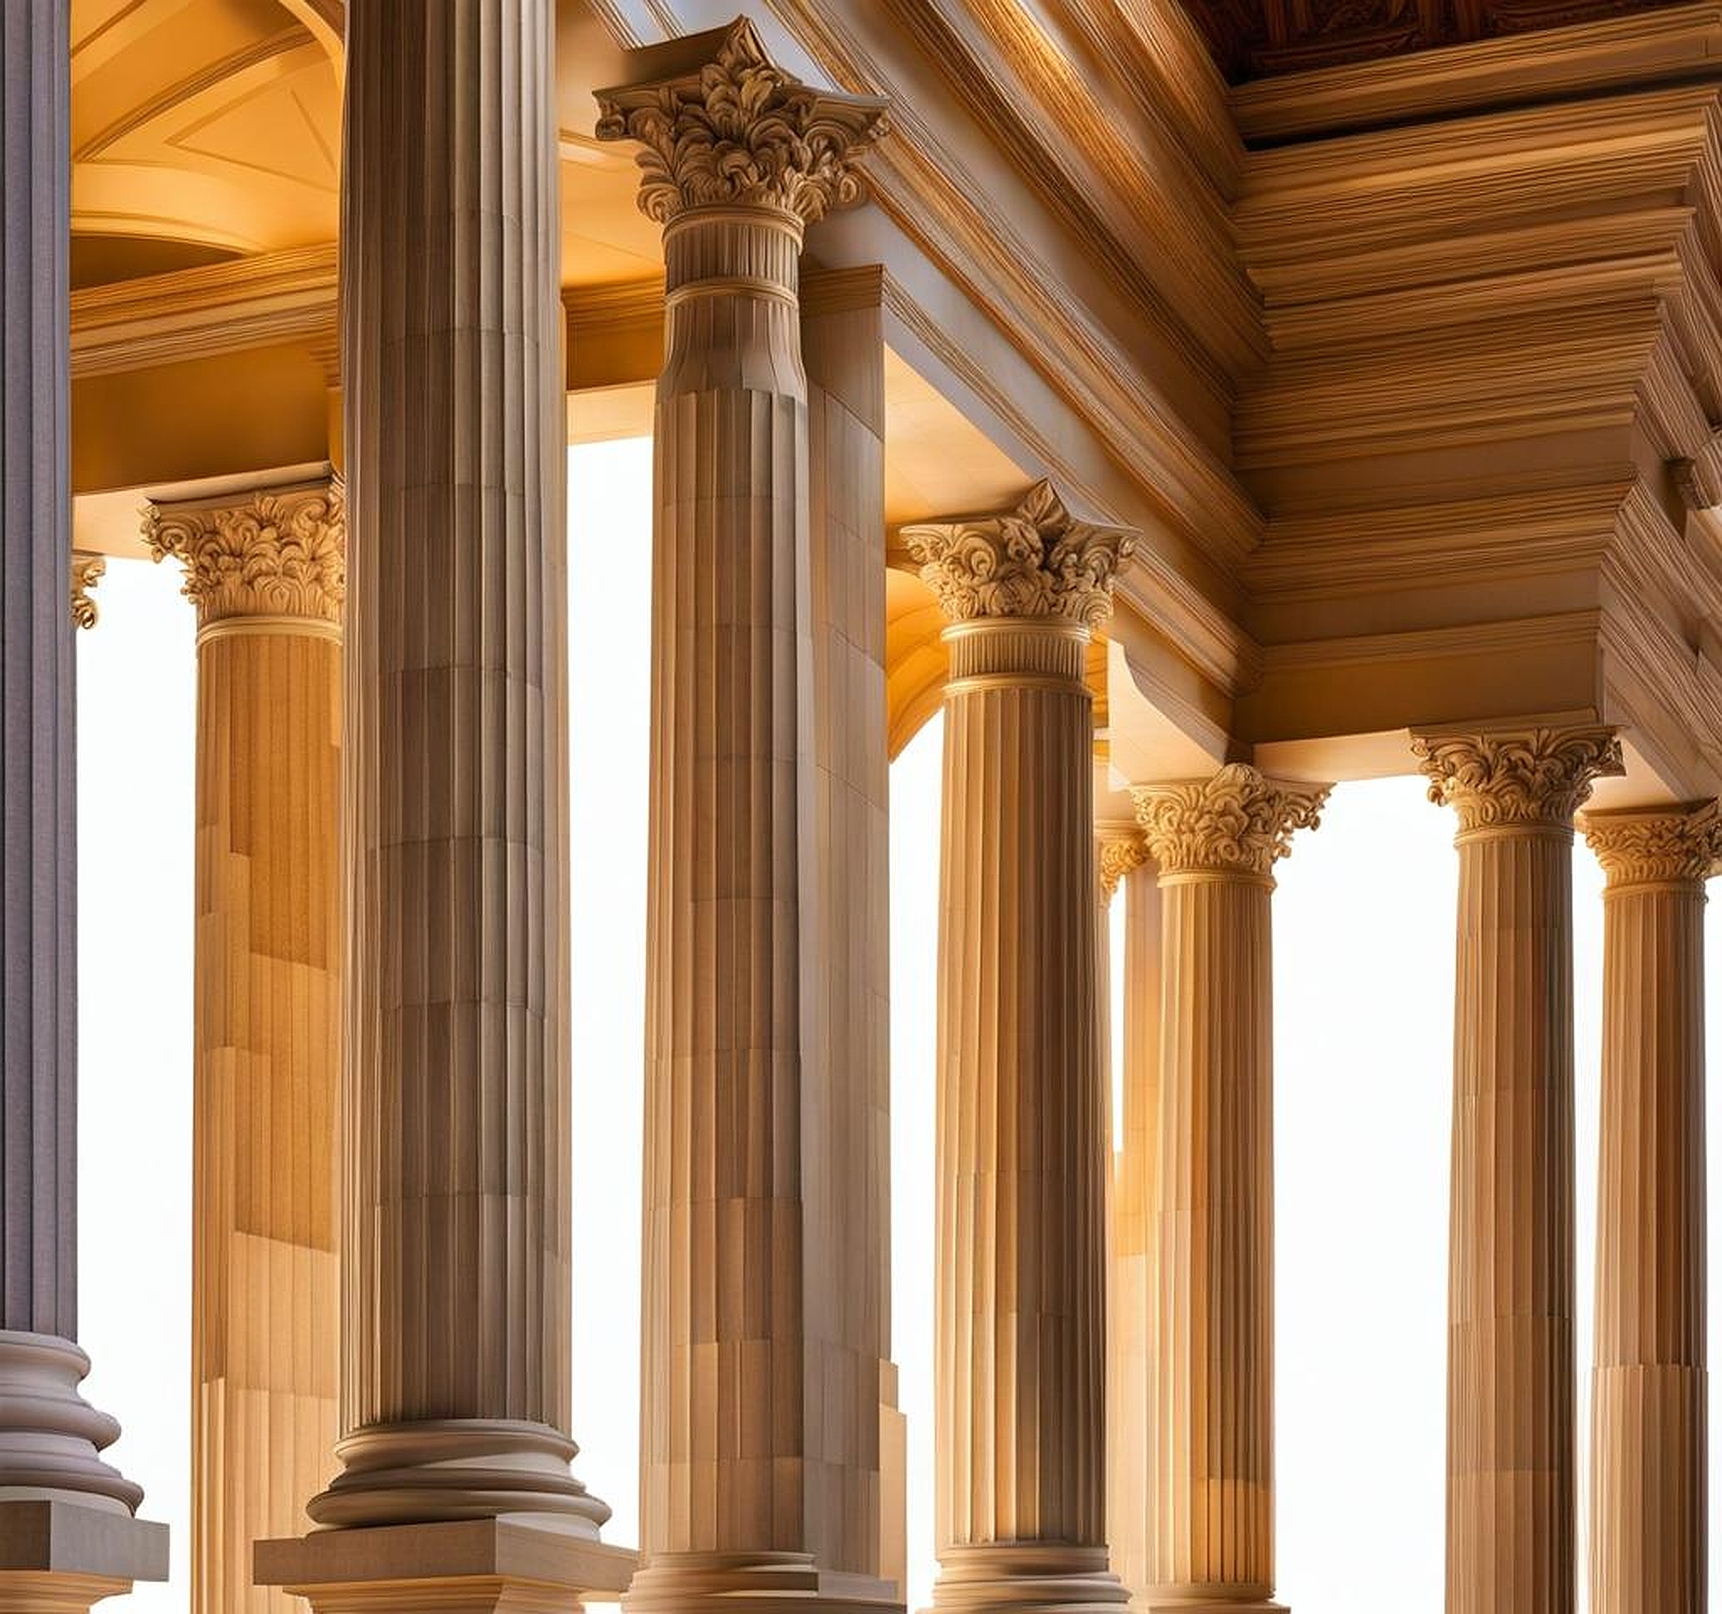 Understanding the Different Types of Columns Used in Architecture